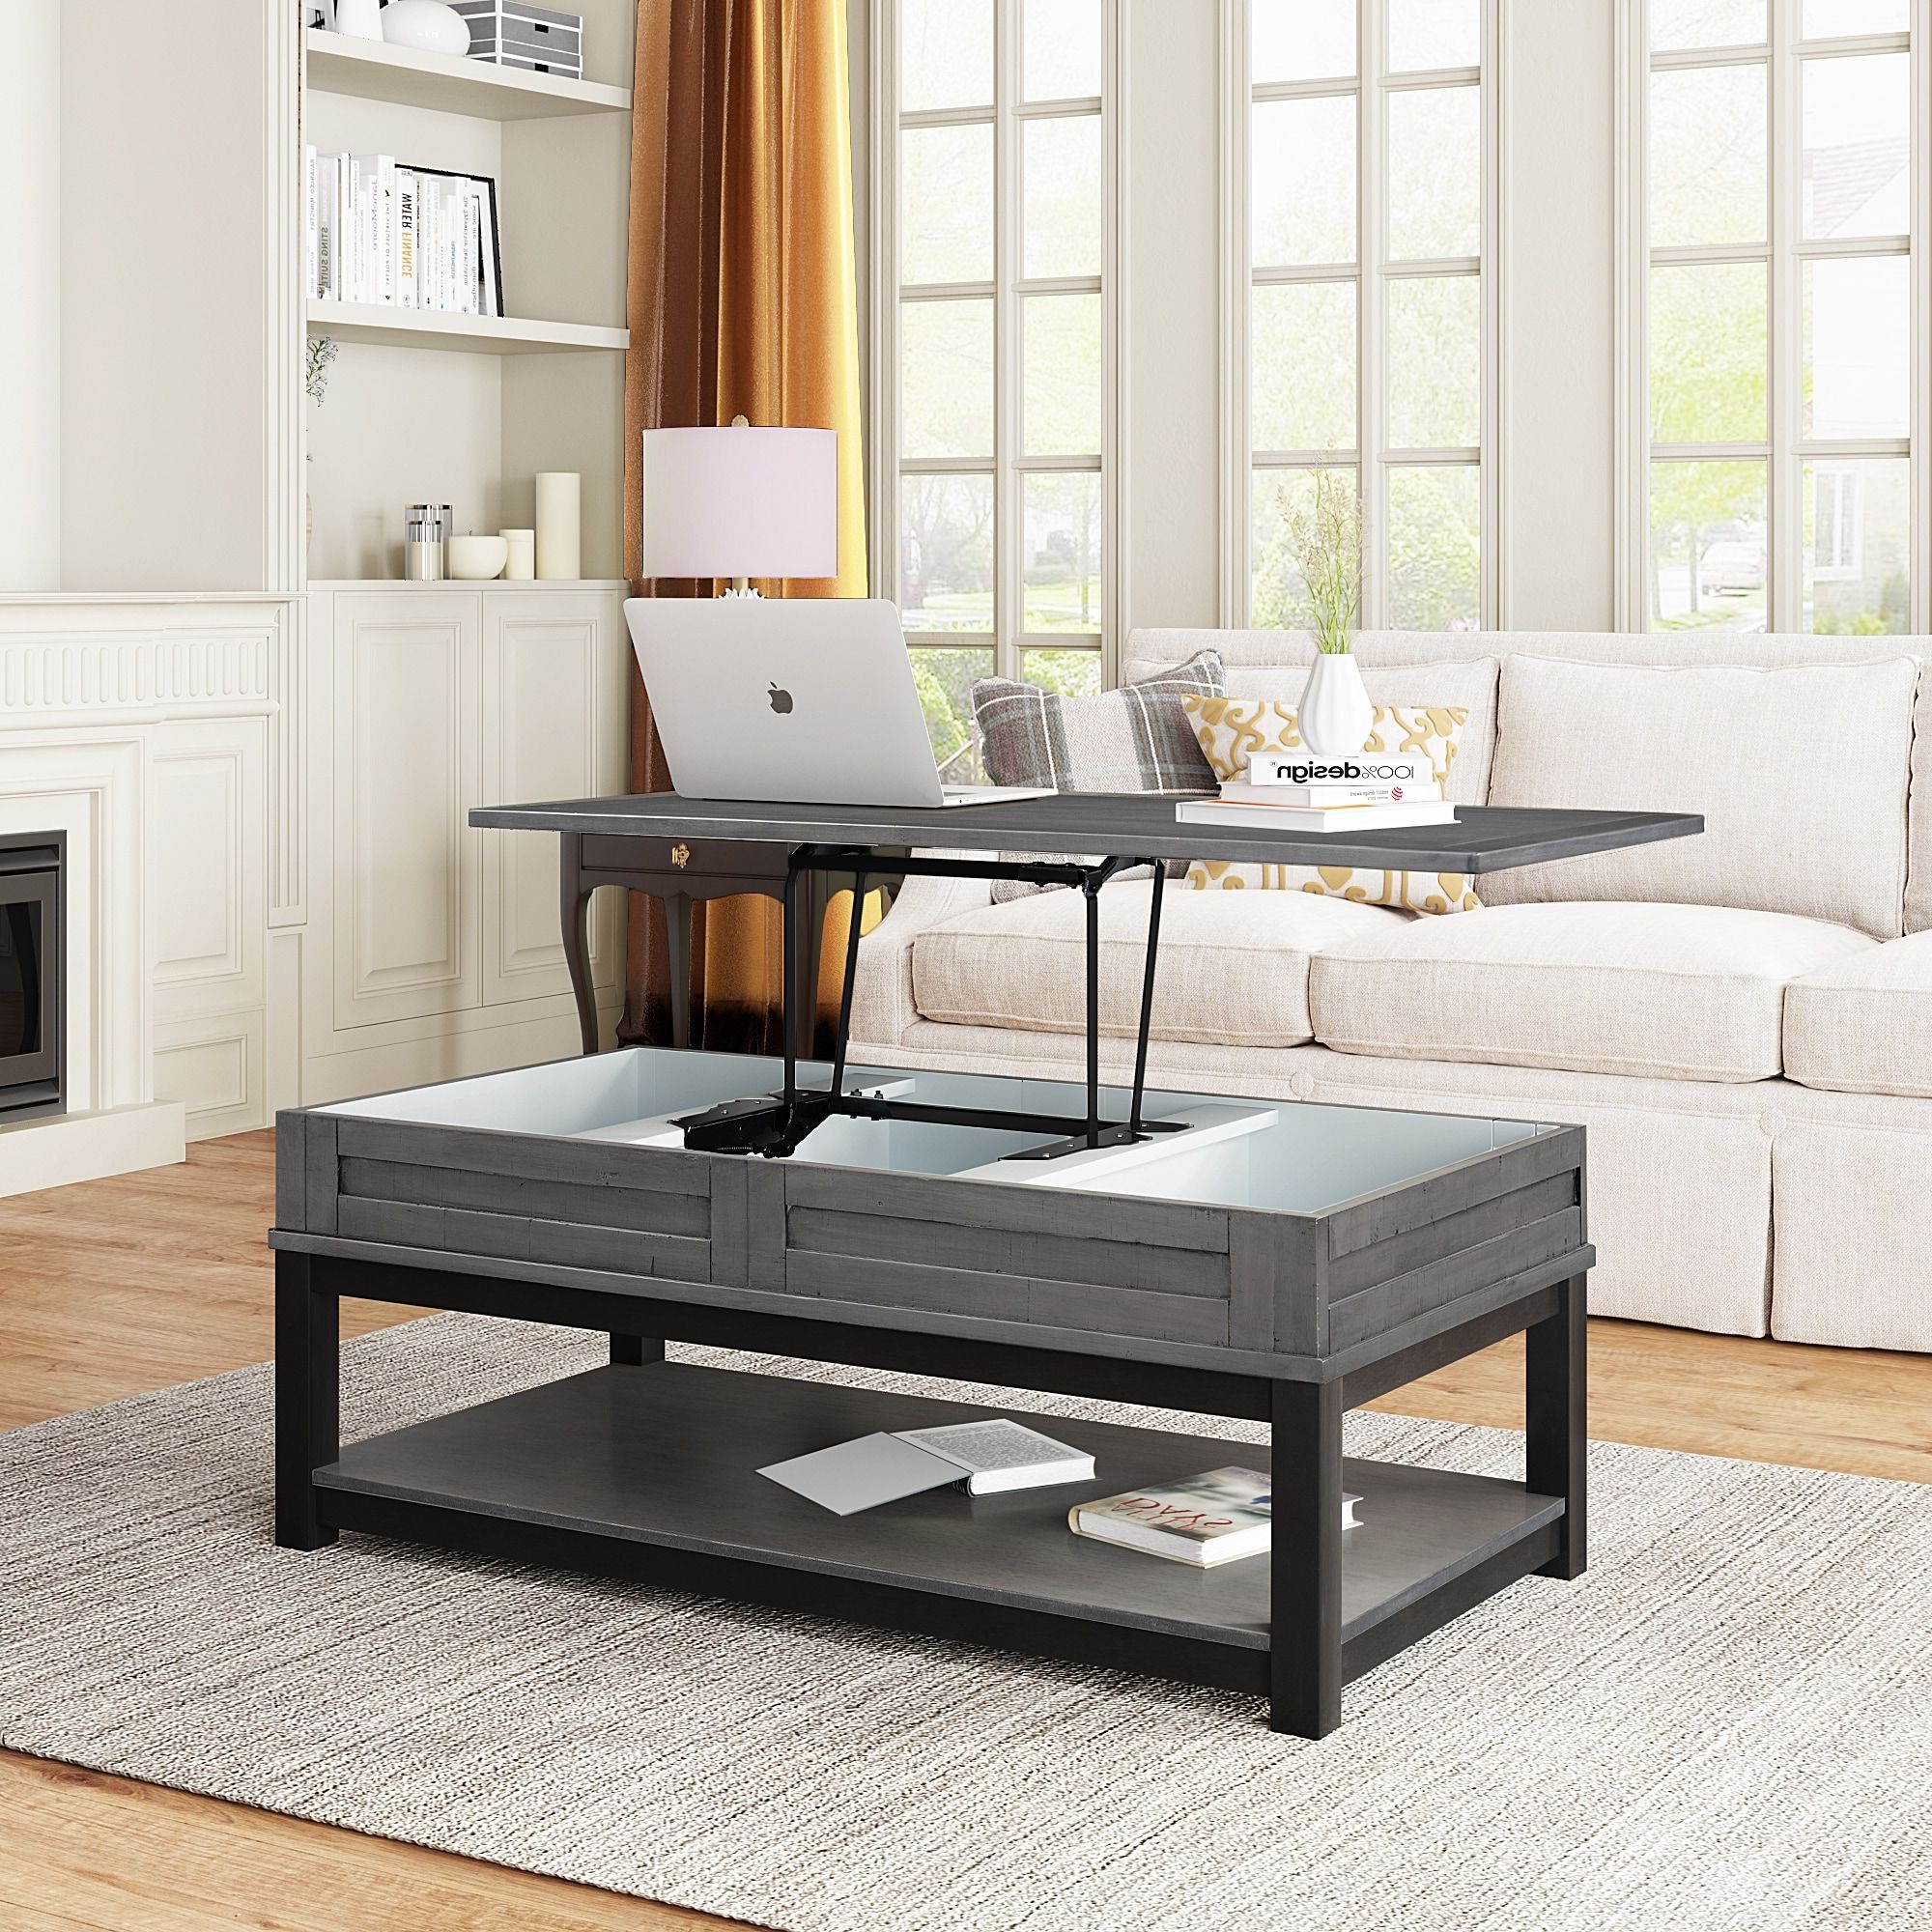 Fashionable Lift Top Coffee Table With Inner Storage Space & Shelf, Modern Simple  Exquisite End Tables For Living Room, Bedroom – Bed Bath & Beyond – 37277080 With Lift Top Coffee Tables With Storage (Photo 8 of 10)